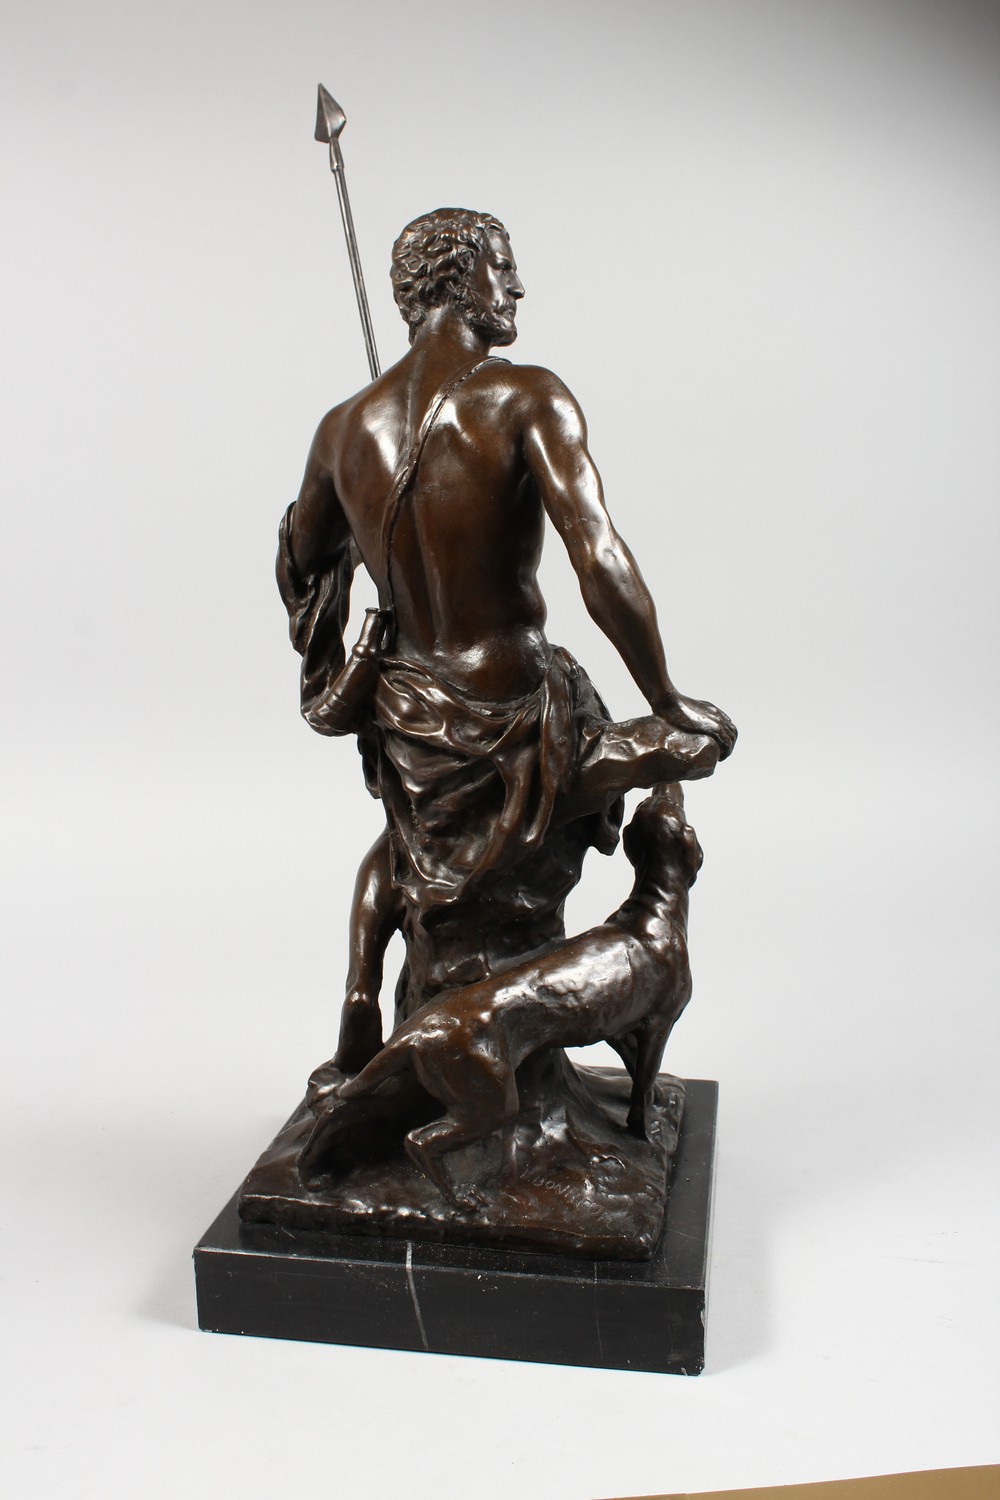 AFTER BONHEUR A LARGE BRONZE FIGURE OF A CLASSICAL MAN holding a spear, a dog by his side. Signed, - Image 6 of 9